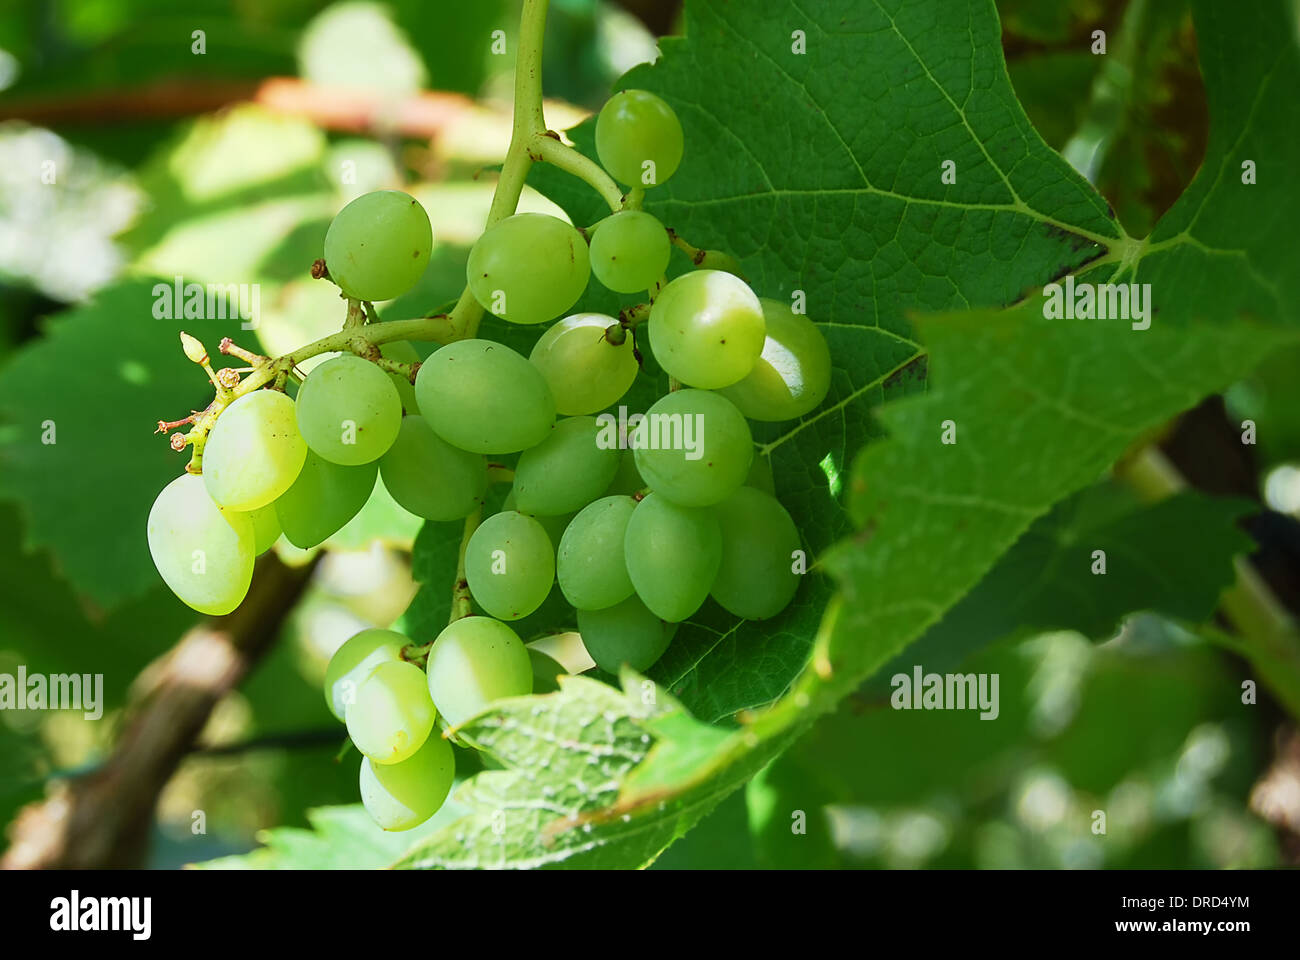 Sun-ripened grapes with green leaves Stock Photo